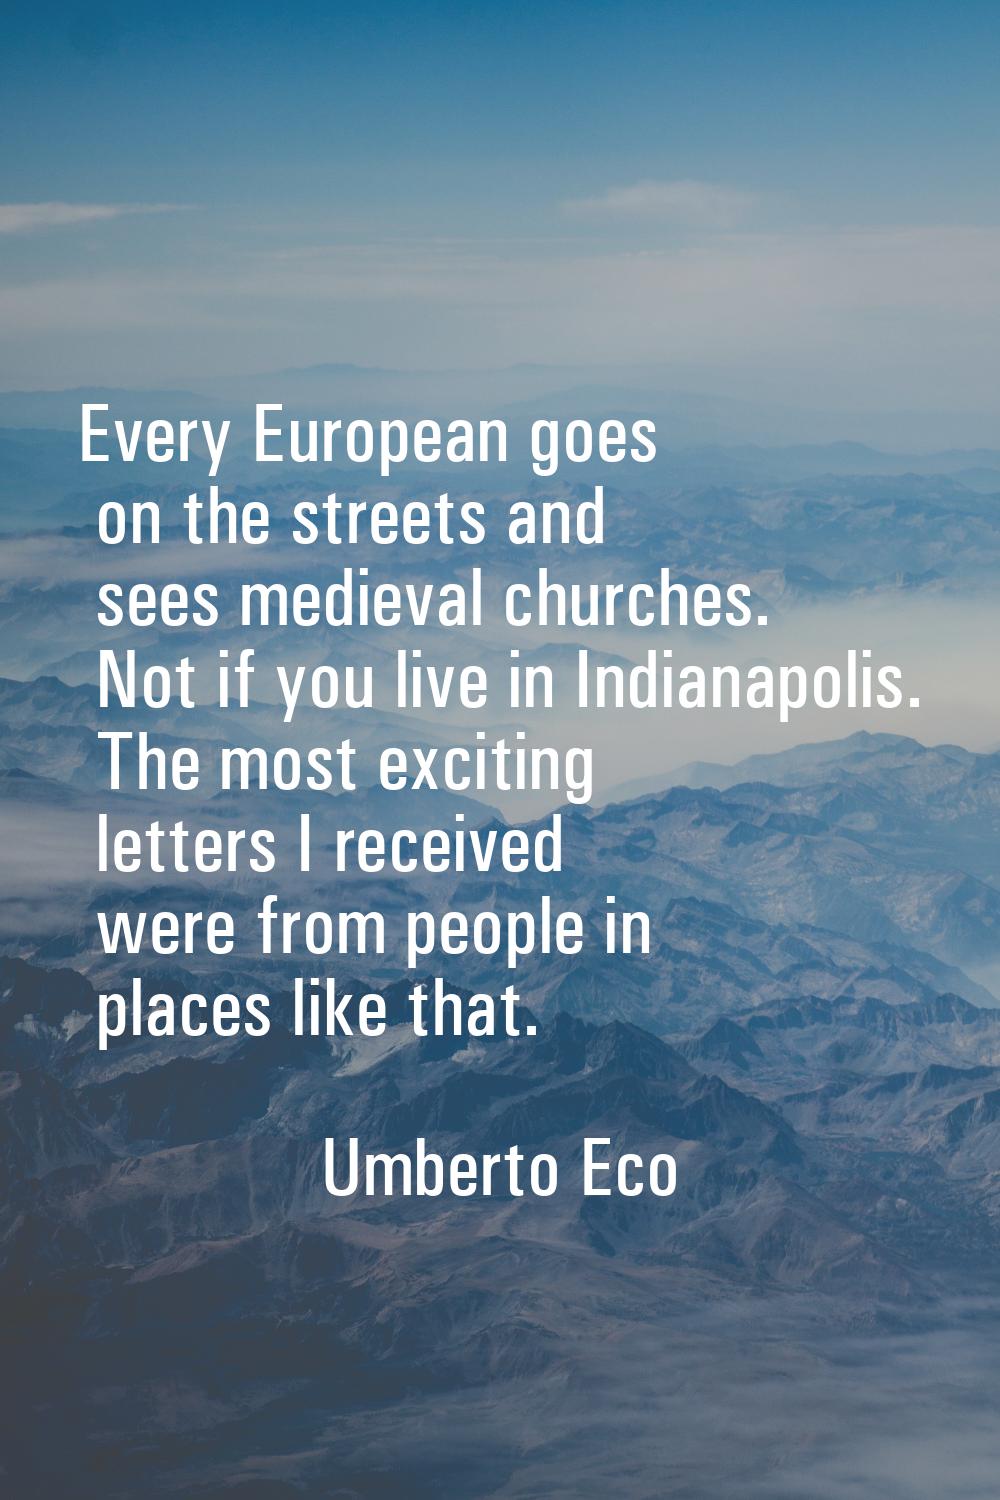 Every European goes on the streets and sees medieval churches. Not if you live in Indianapolis. The